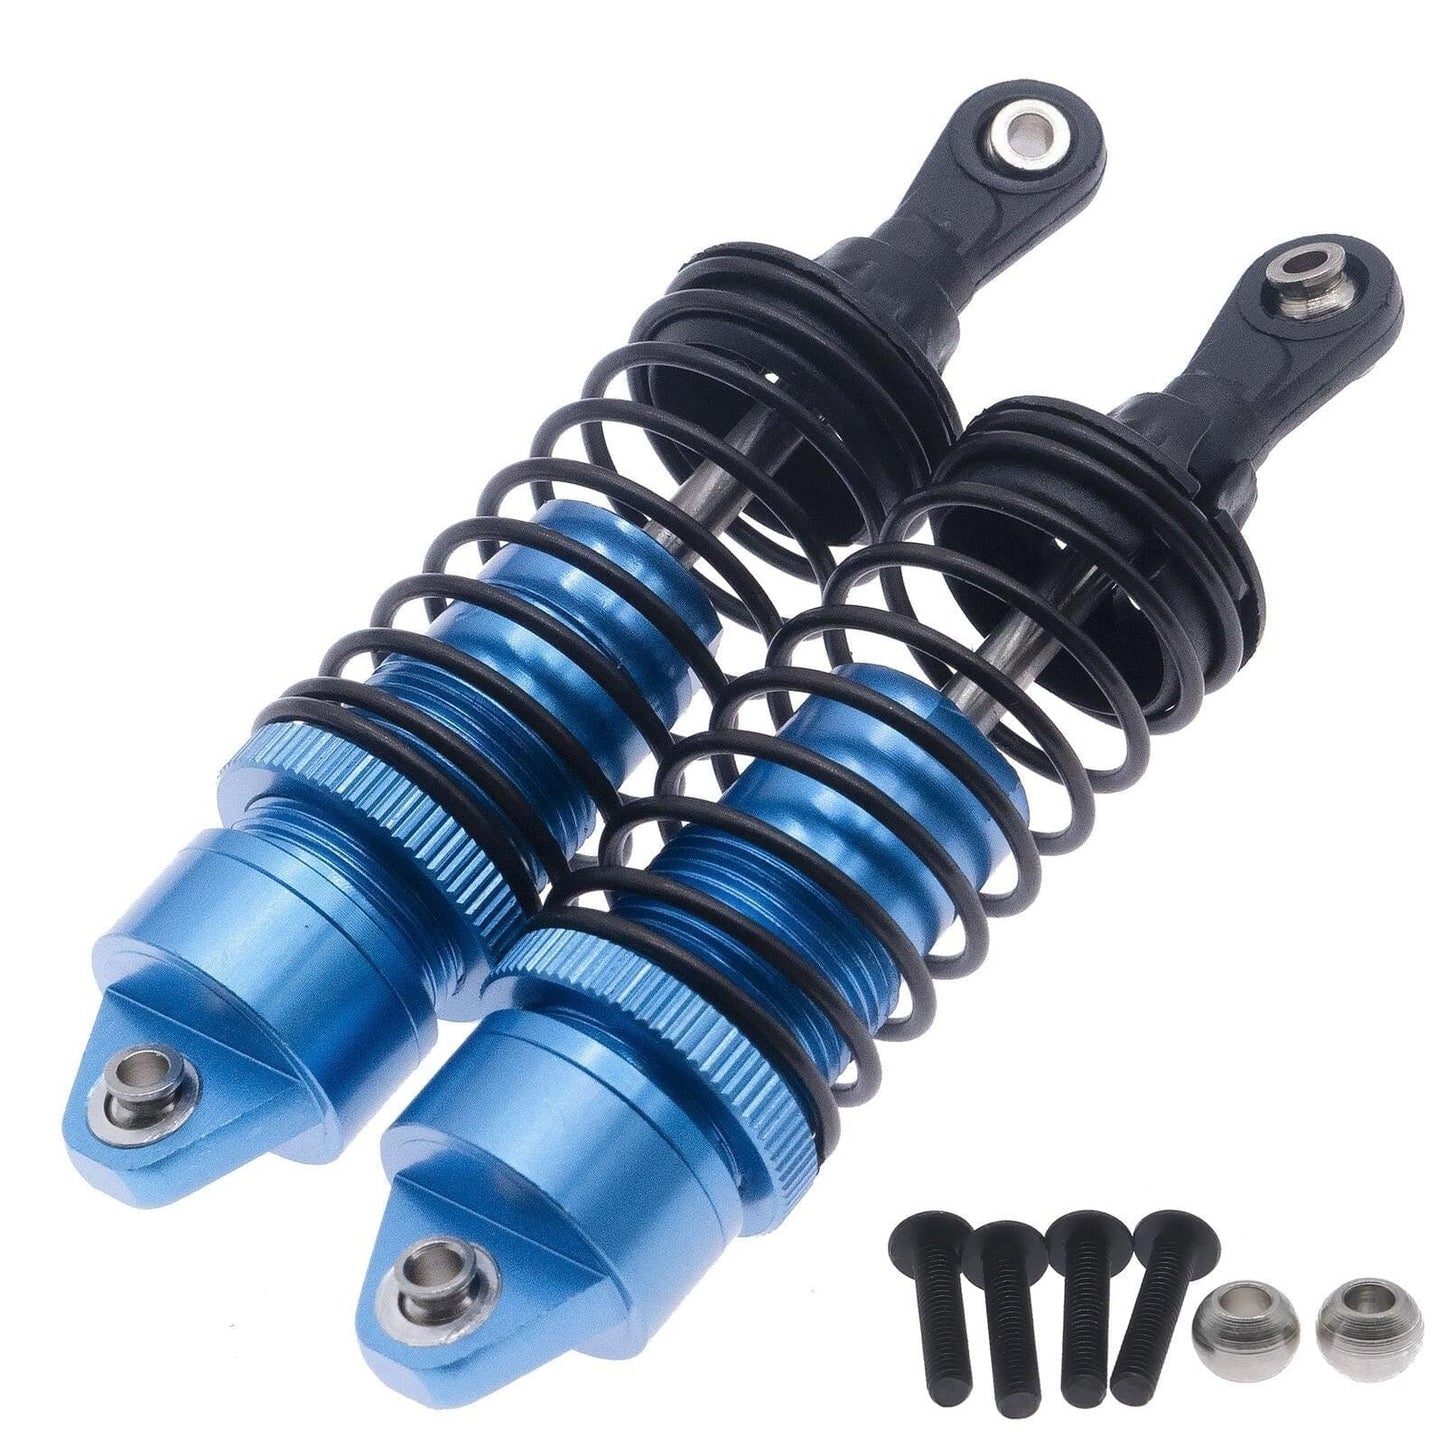 RCAWD ECX UPGRADE PARTS Blue RCAWD Front Shock Absorber For RC Car 1/10 Horizon ECX 2WD Series Ruckus Axe MT